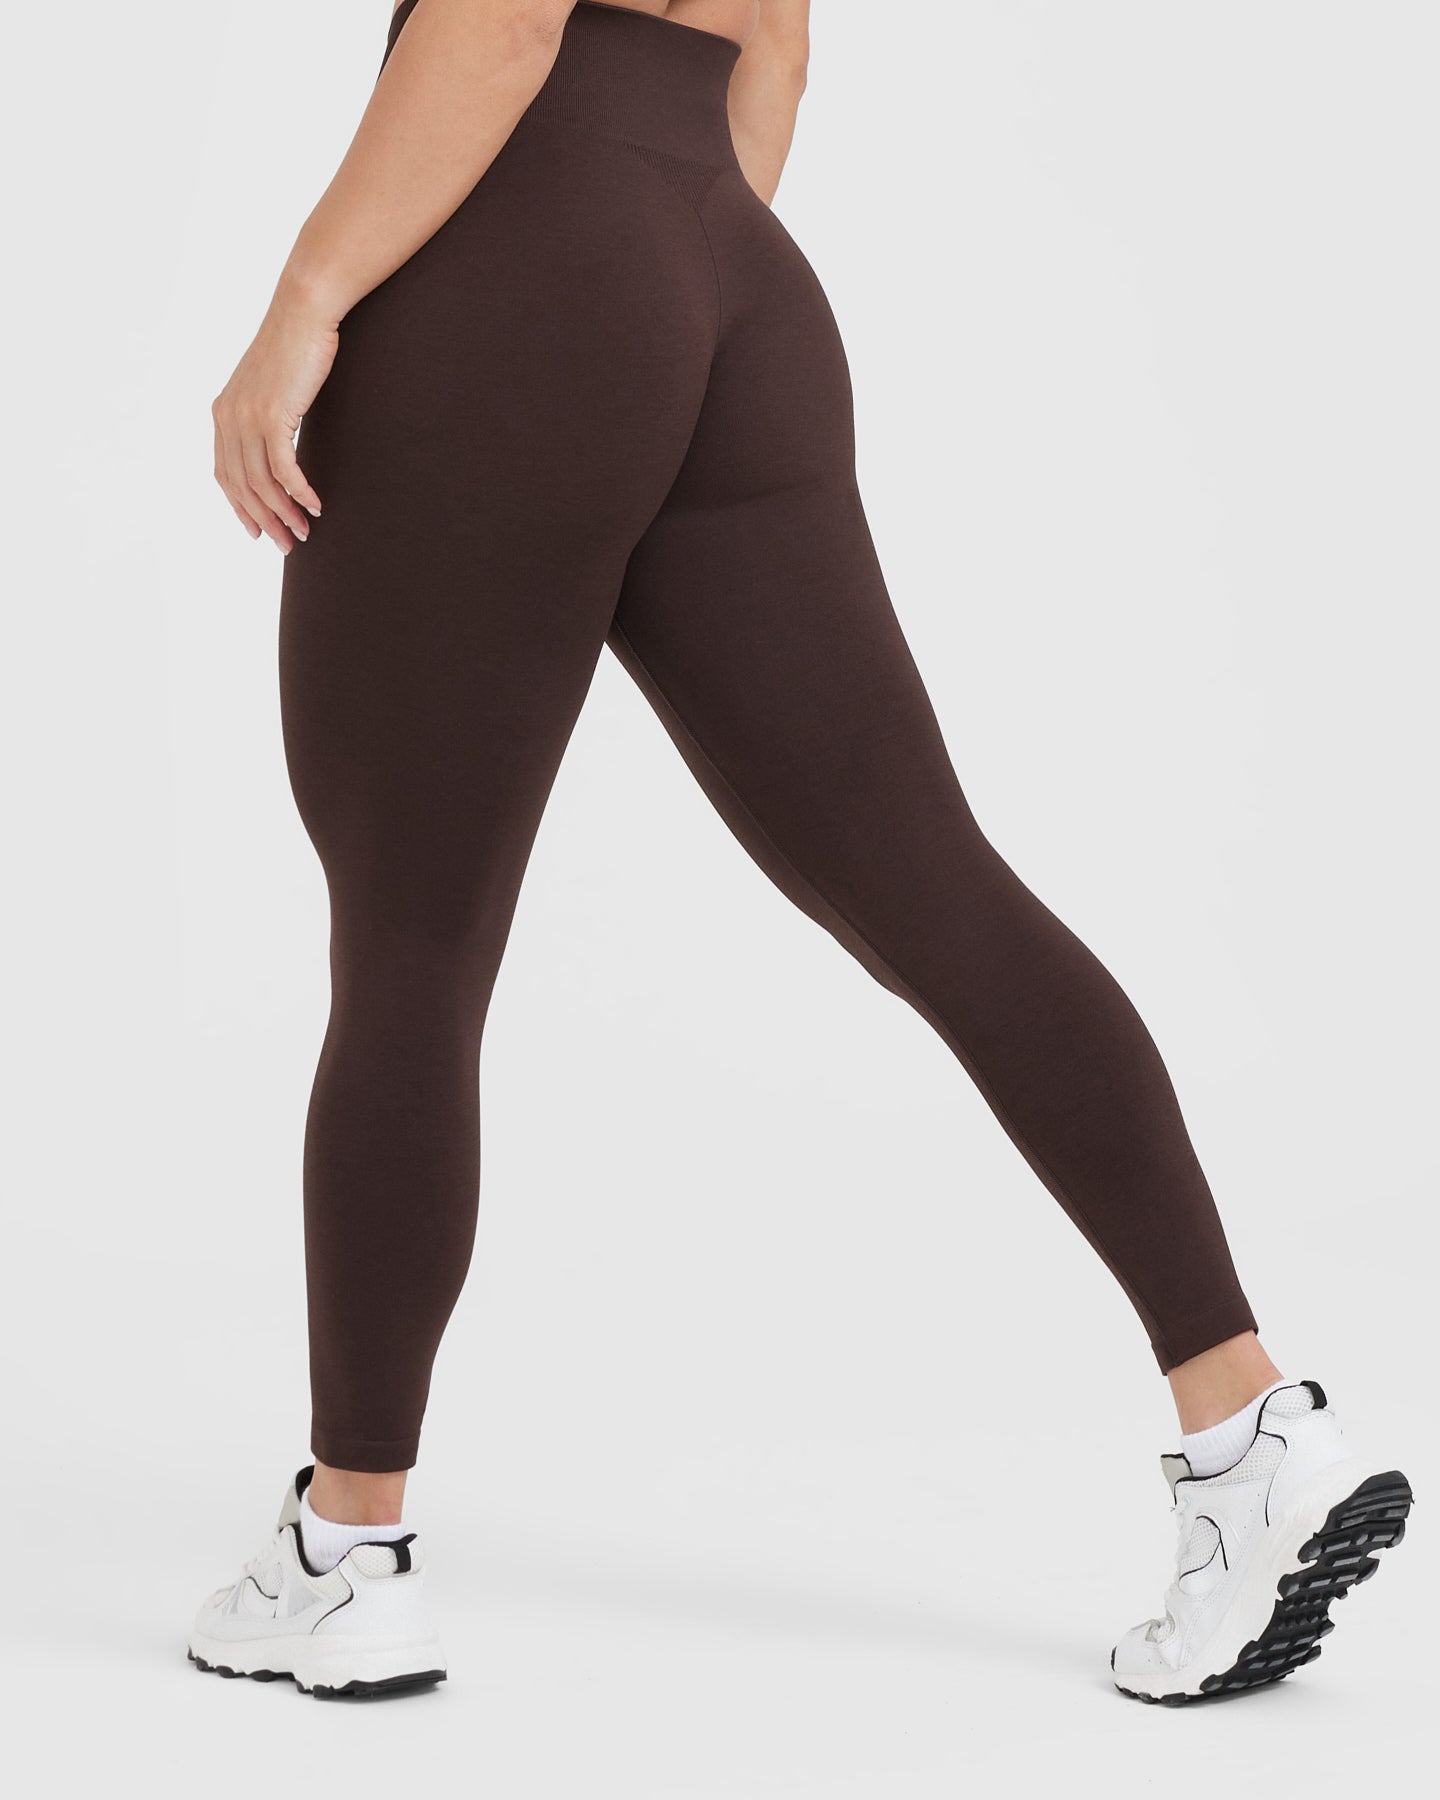 70% Seamless Cocoa Marl | Active 2.0 US Oner Classic Leggings